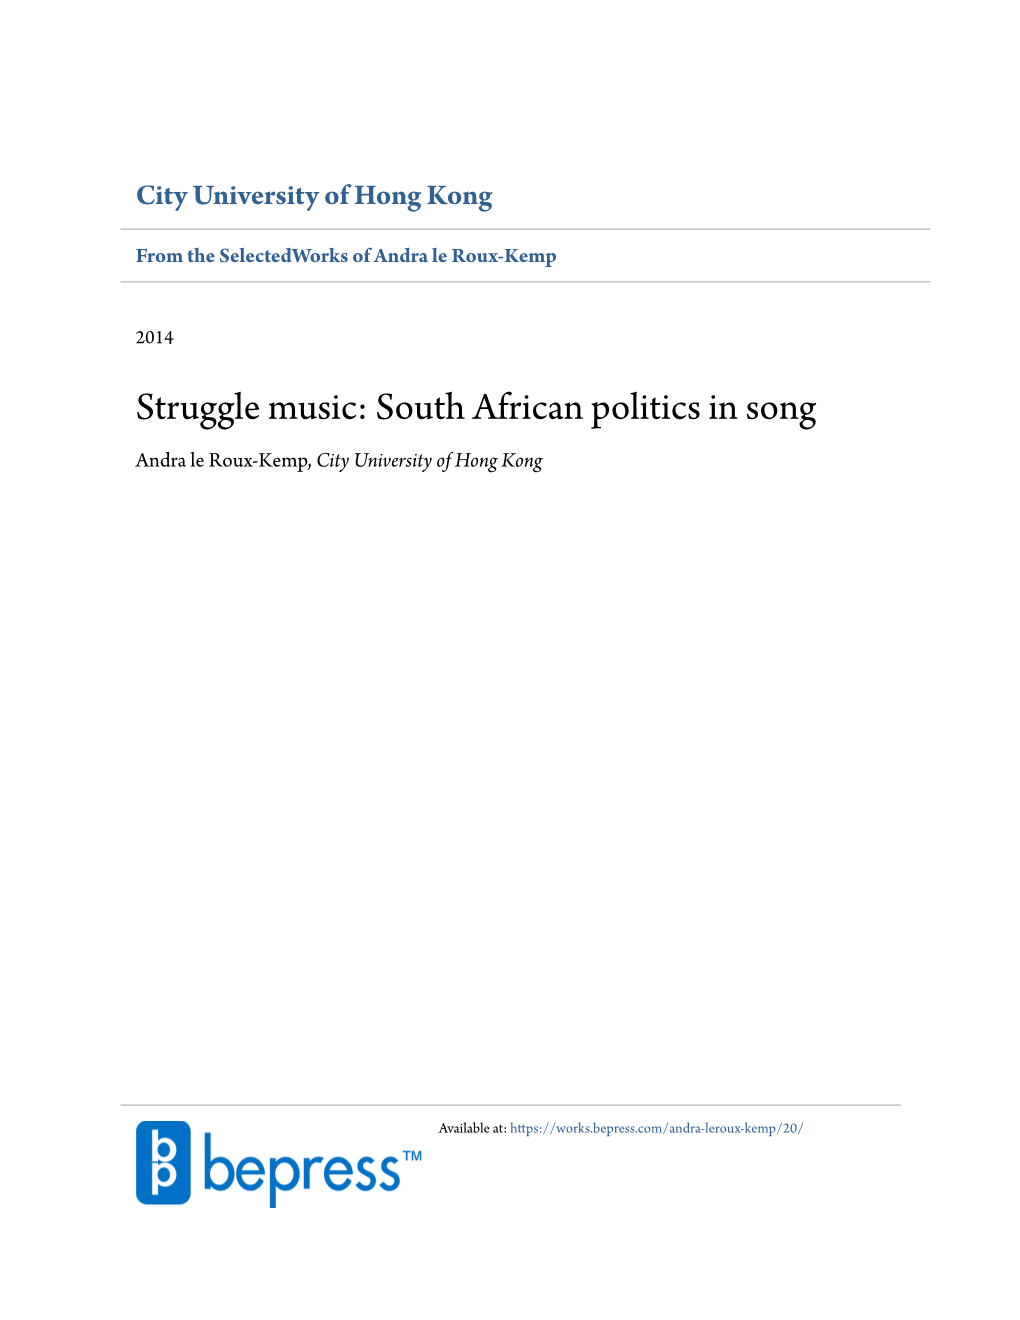 Struggle Music: South African Politics in Song Andra Le Roux-Kemp, City University of Hong Kong